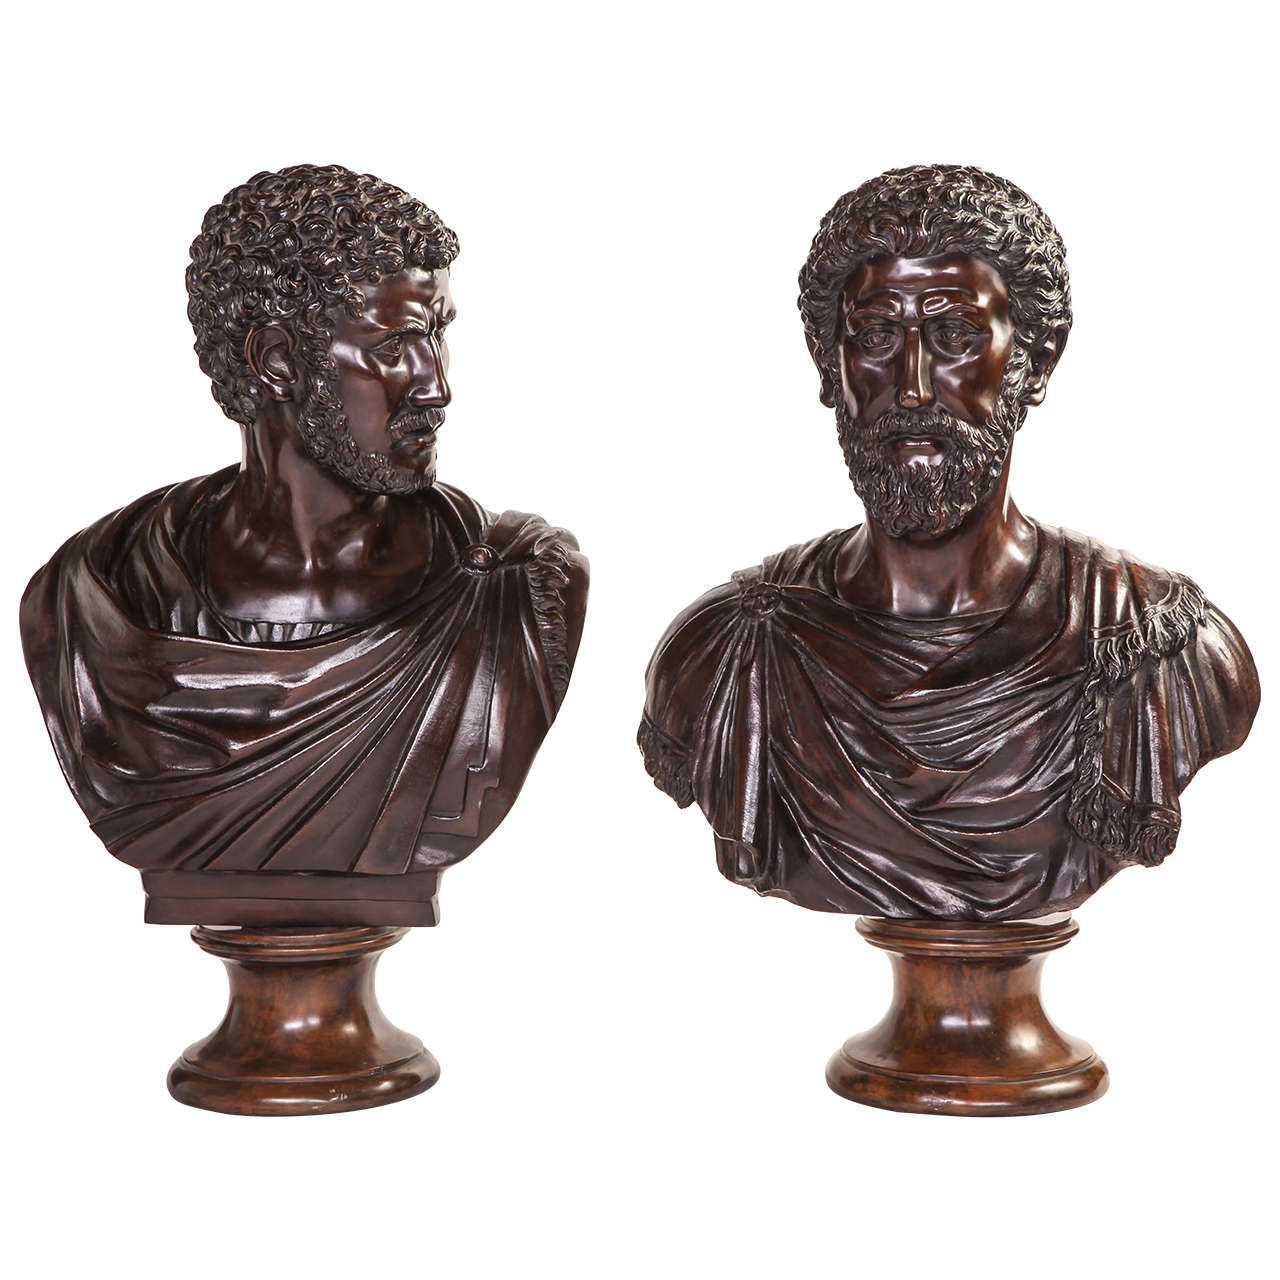 19th Century Bronze Busts of Roman Emperors, signed V. C.